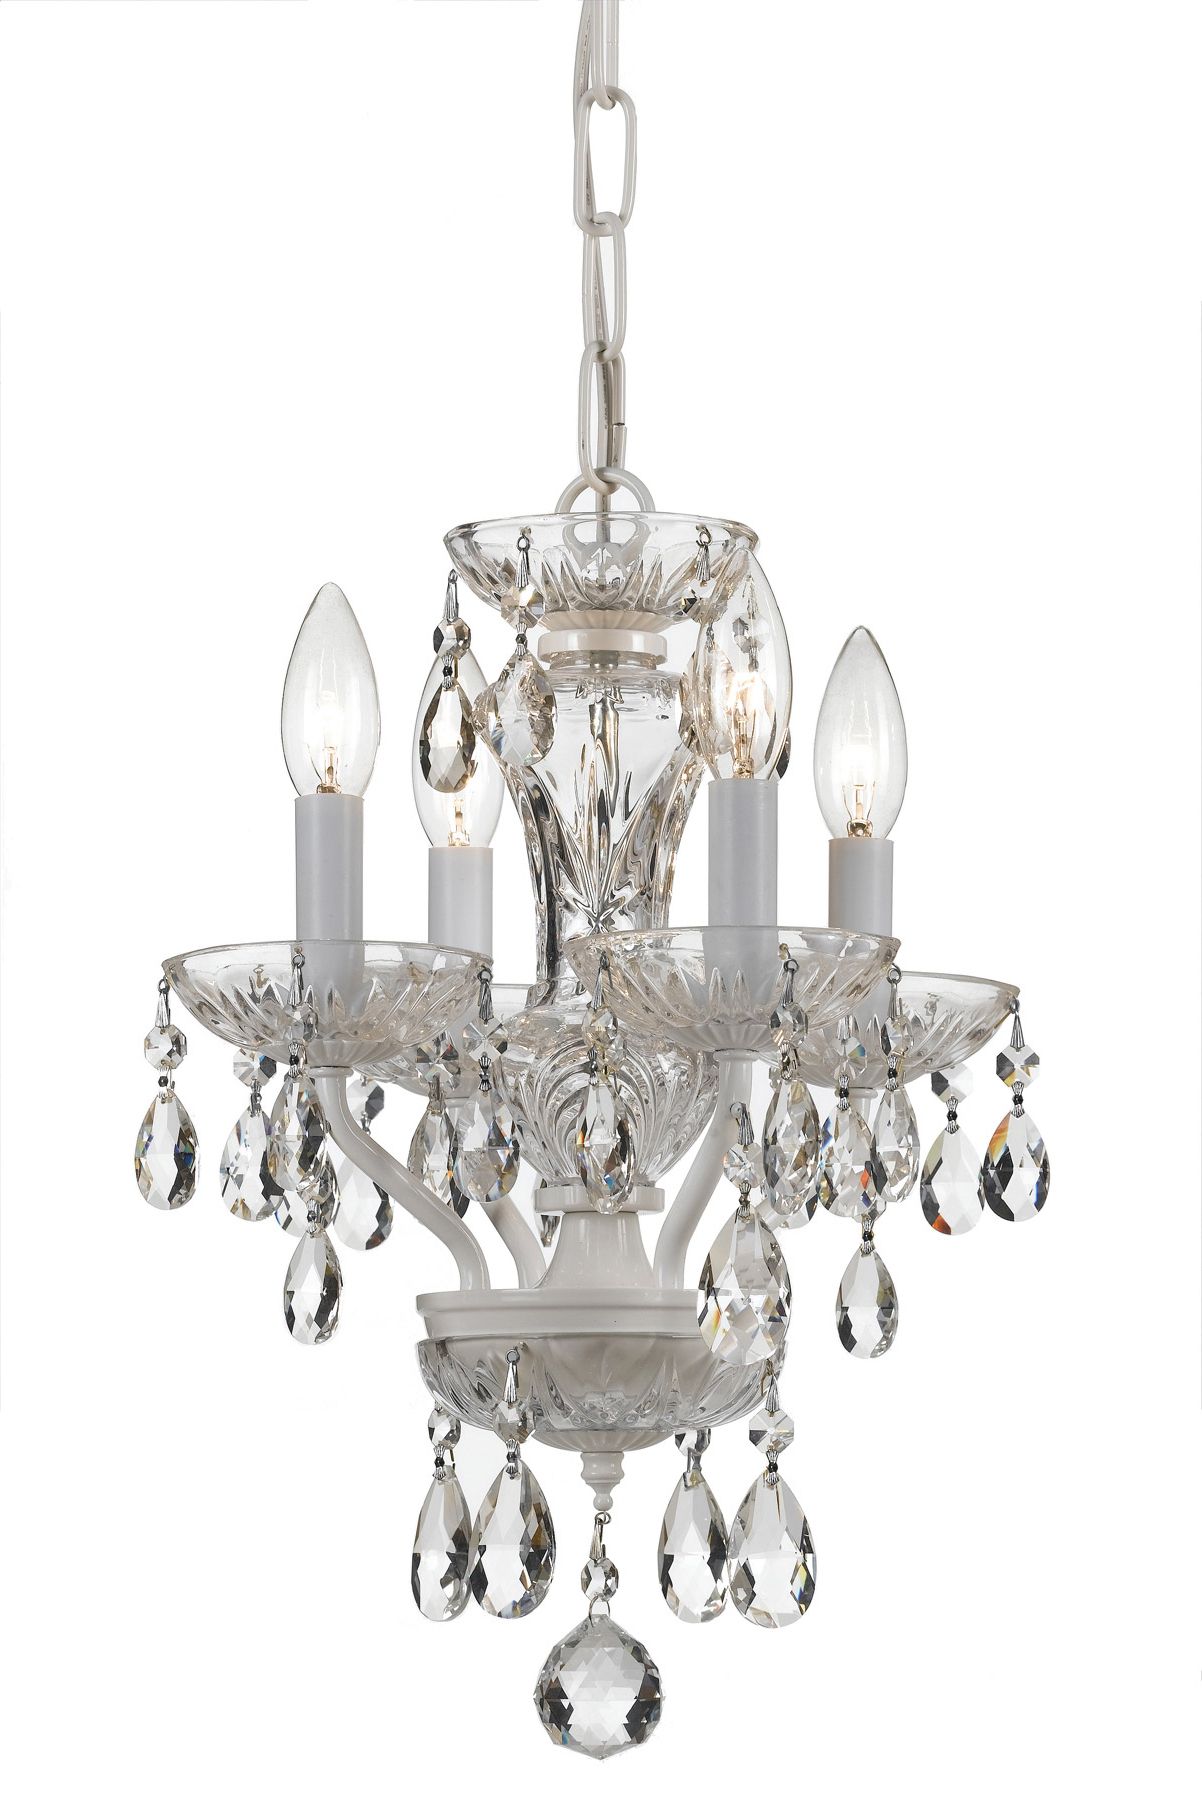 Crystorama 5534 Ww Cl Mwp Crystal 4 Light White Mini Throughout Best And Newest Clear Crystal Chandeliers (View 8 of 15)